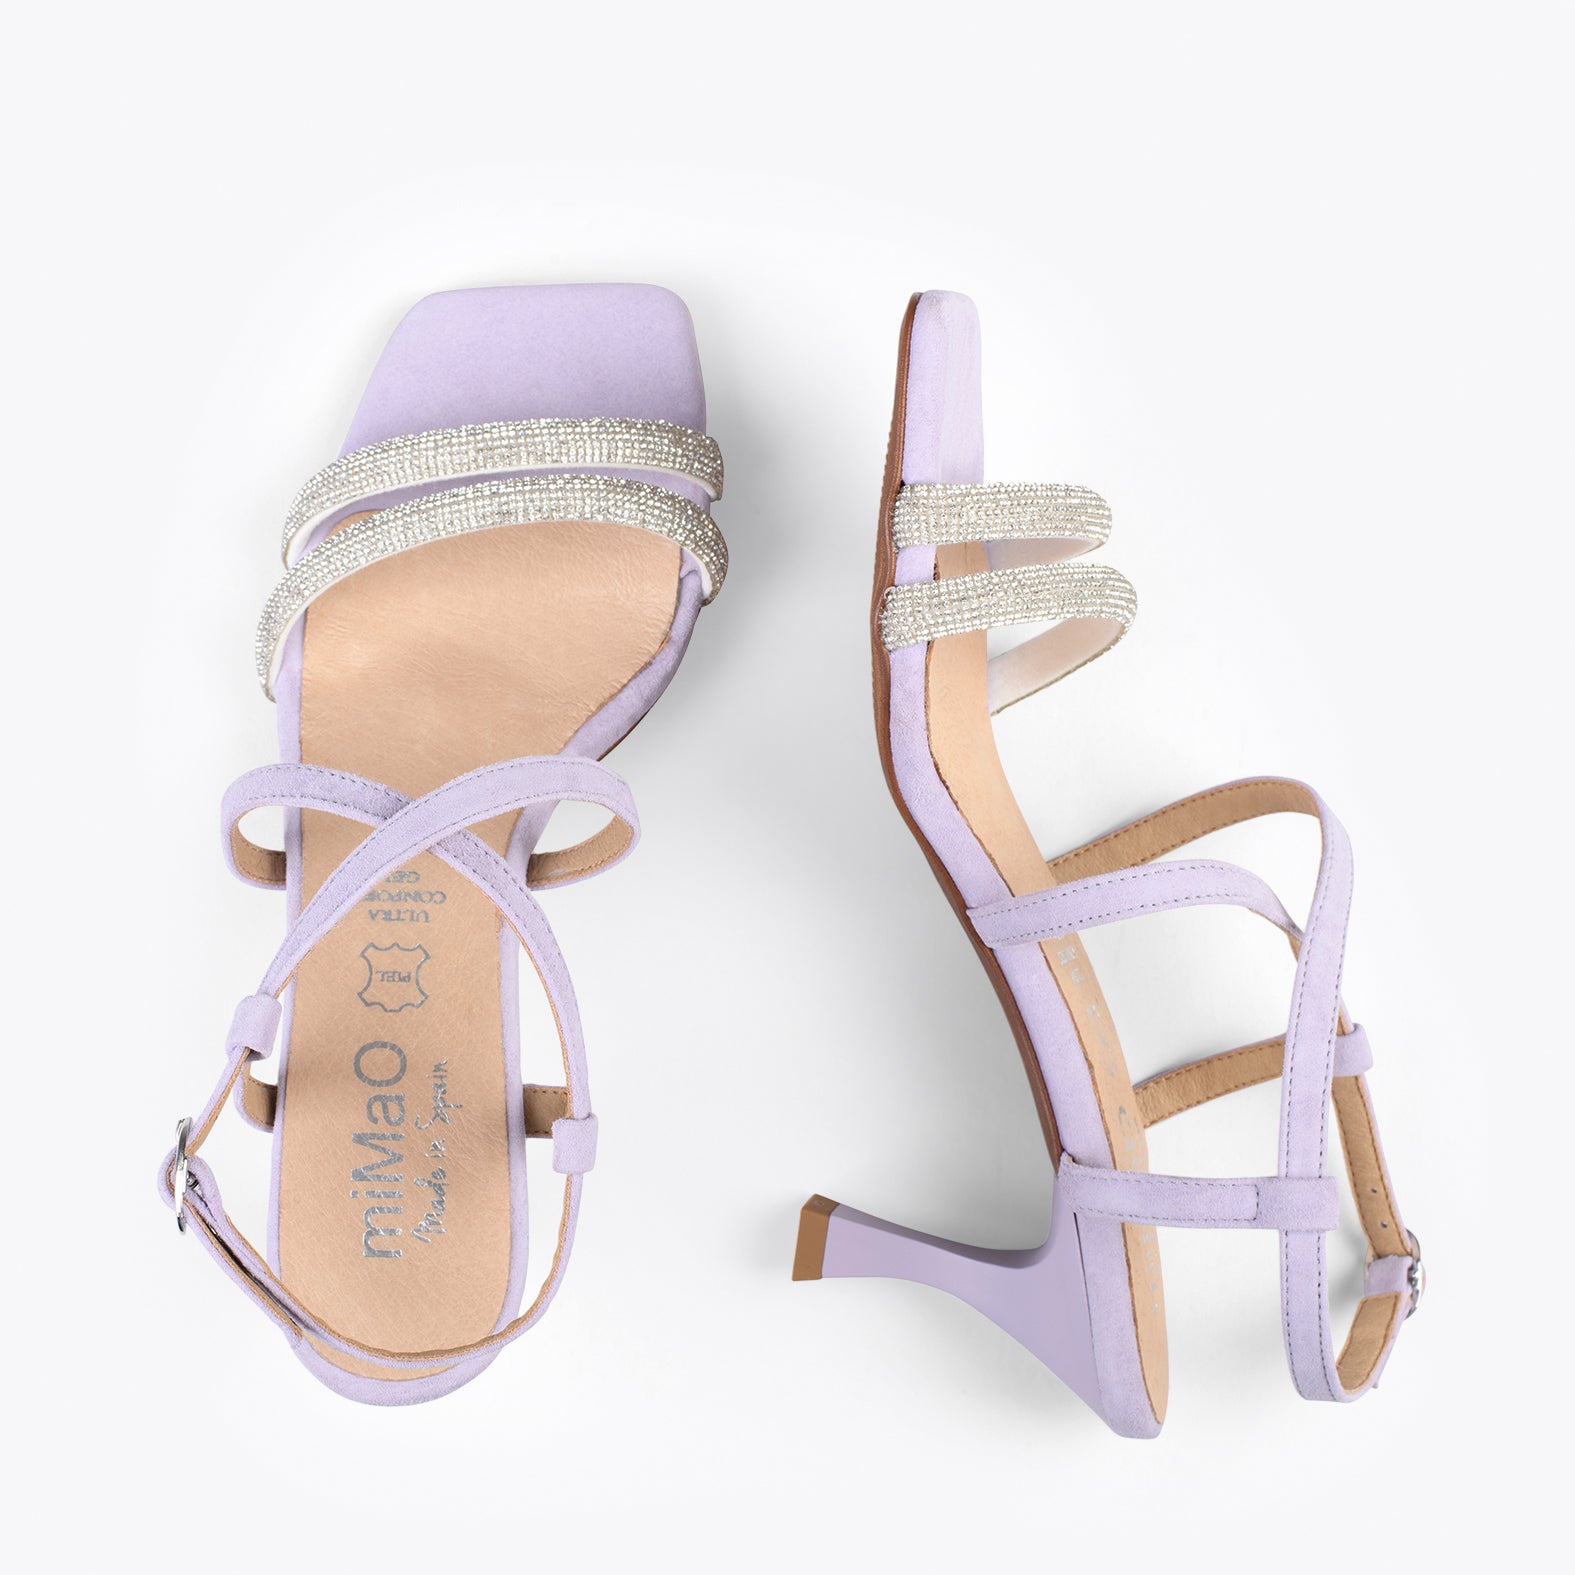 SHINY – LAVENDER high heel sandals with strass straps